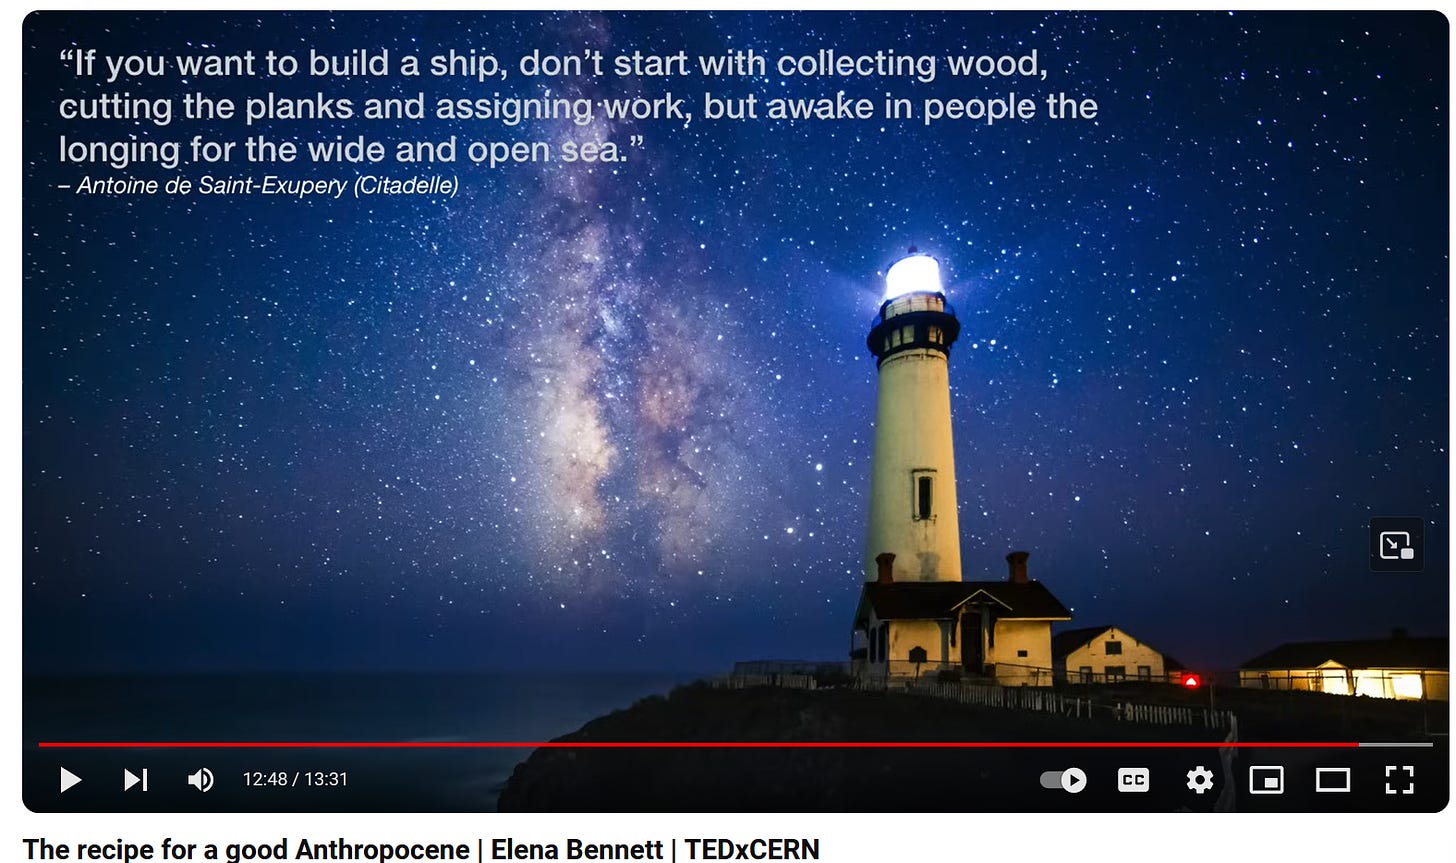 screenshot from Elena Bennett's ted talk: "If you want to build a ship, don't start with collection wood, cutting the planks and assigning work, but awake in people the longing for a the wide and open sea." — Antoine de Saint-Exupery